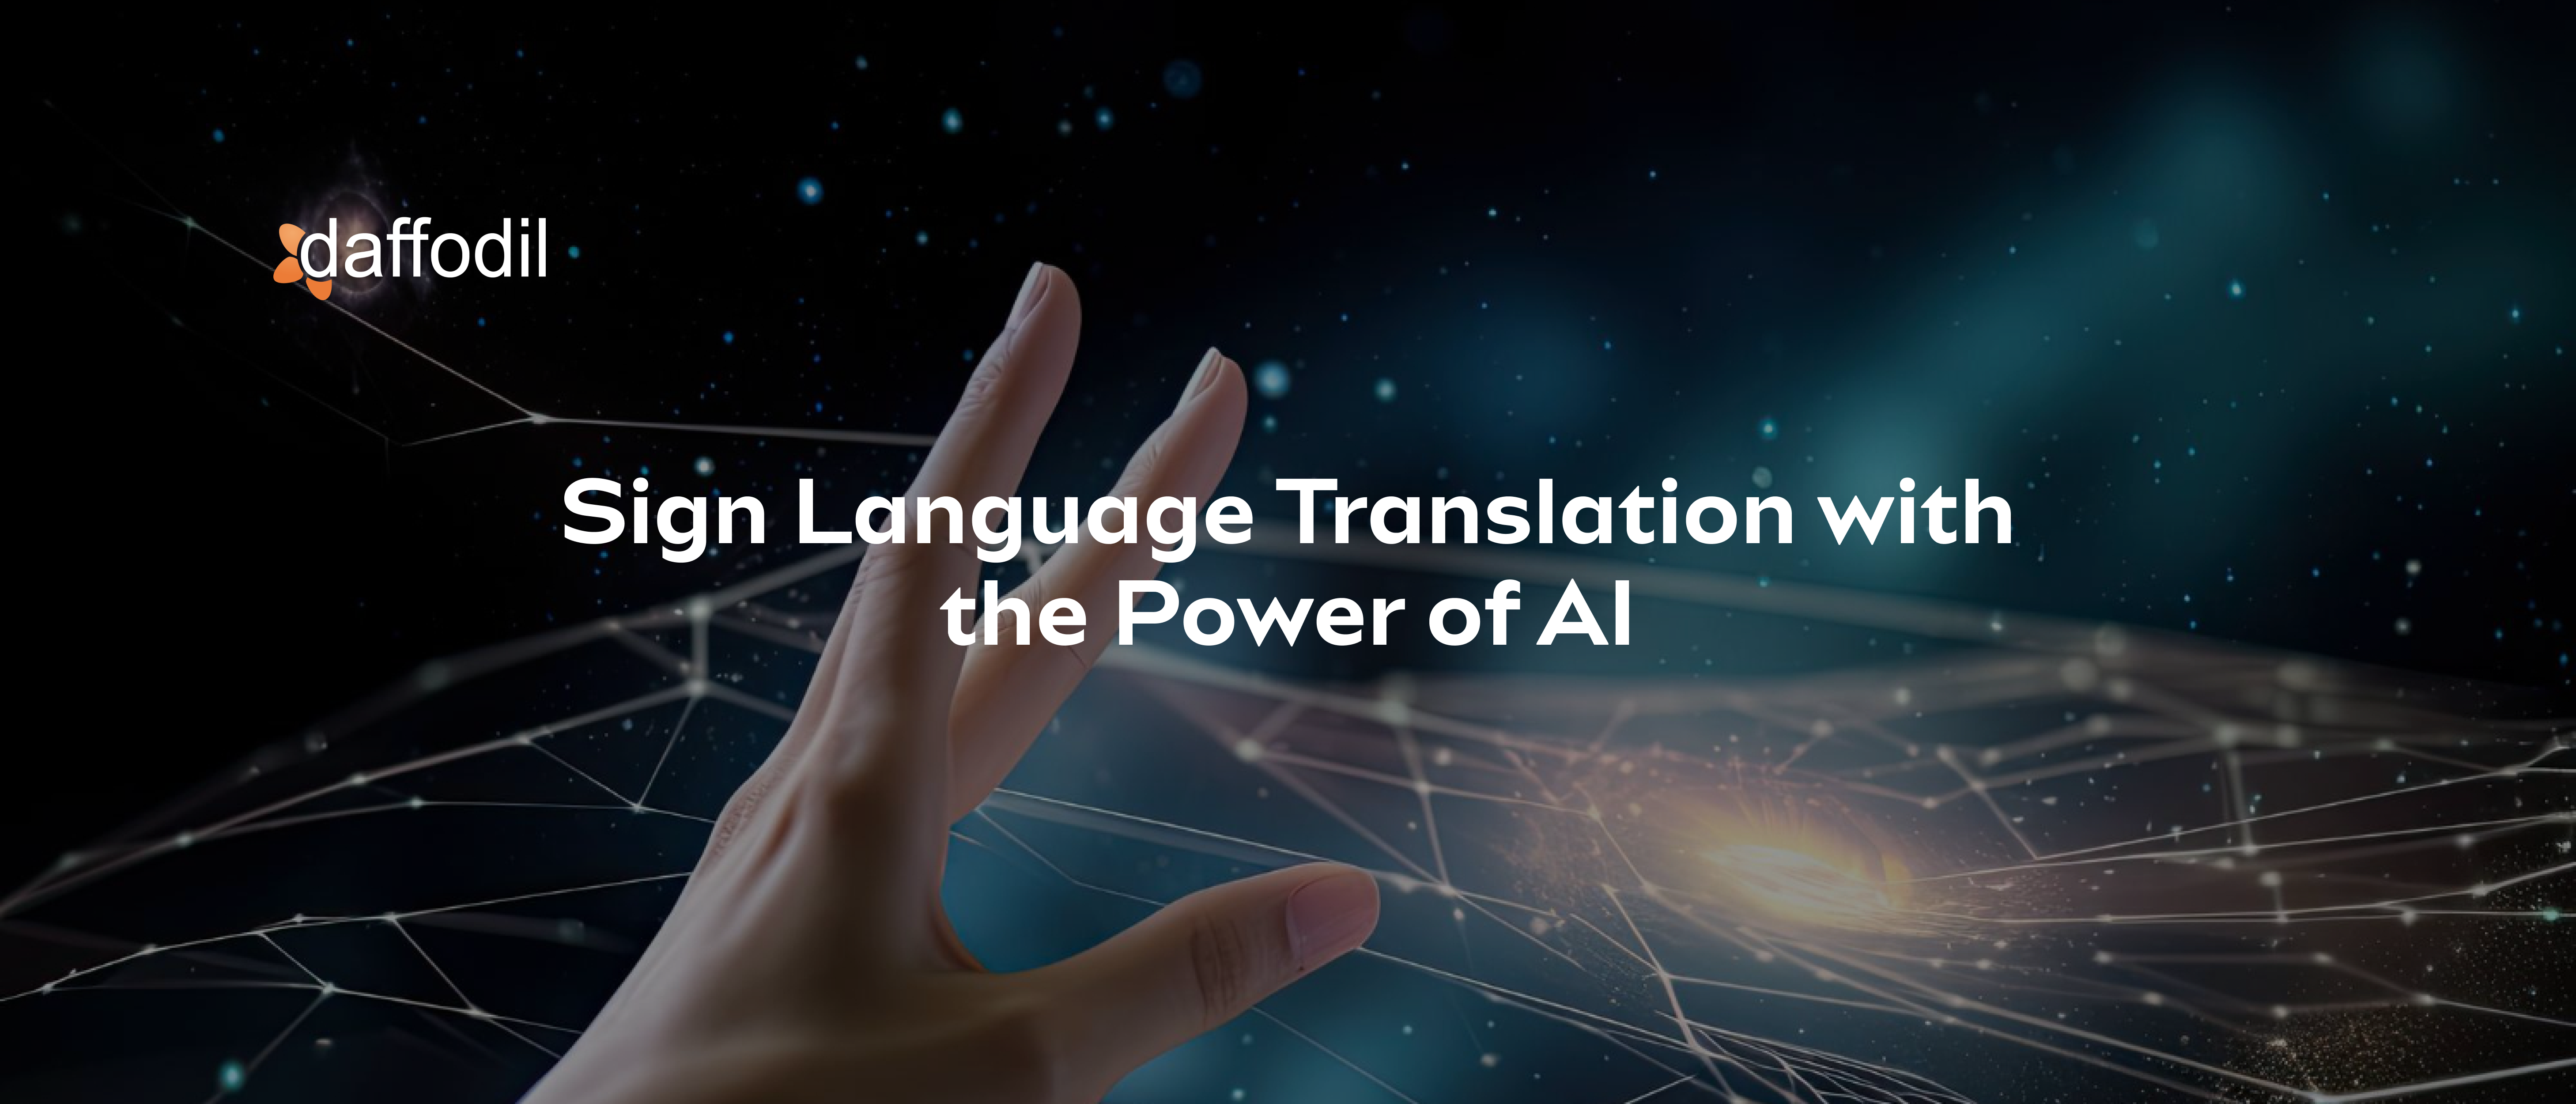 Sign Language Translation with the Power of AI